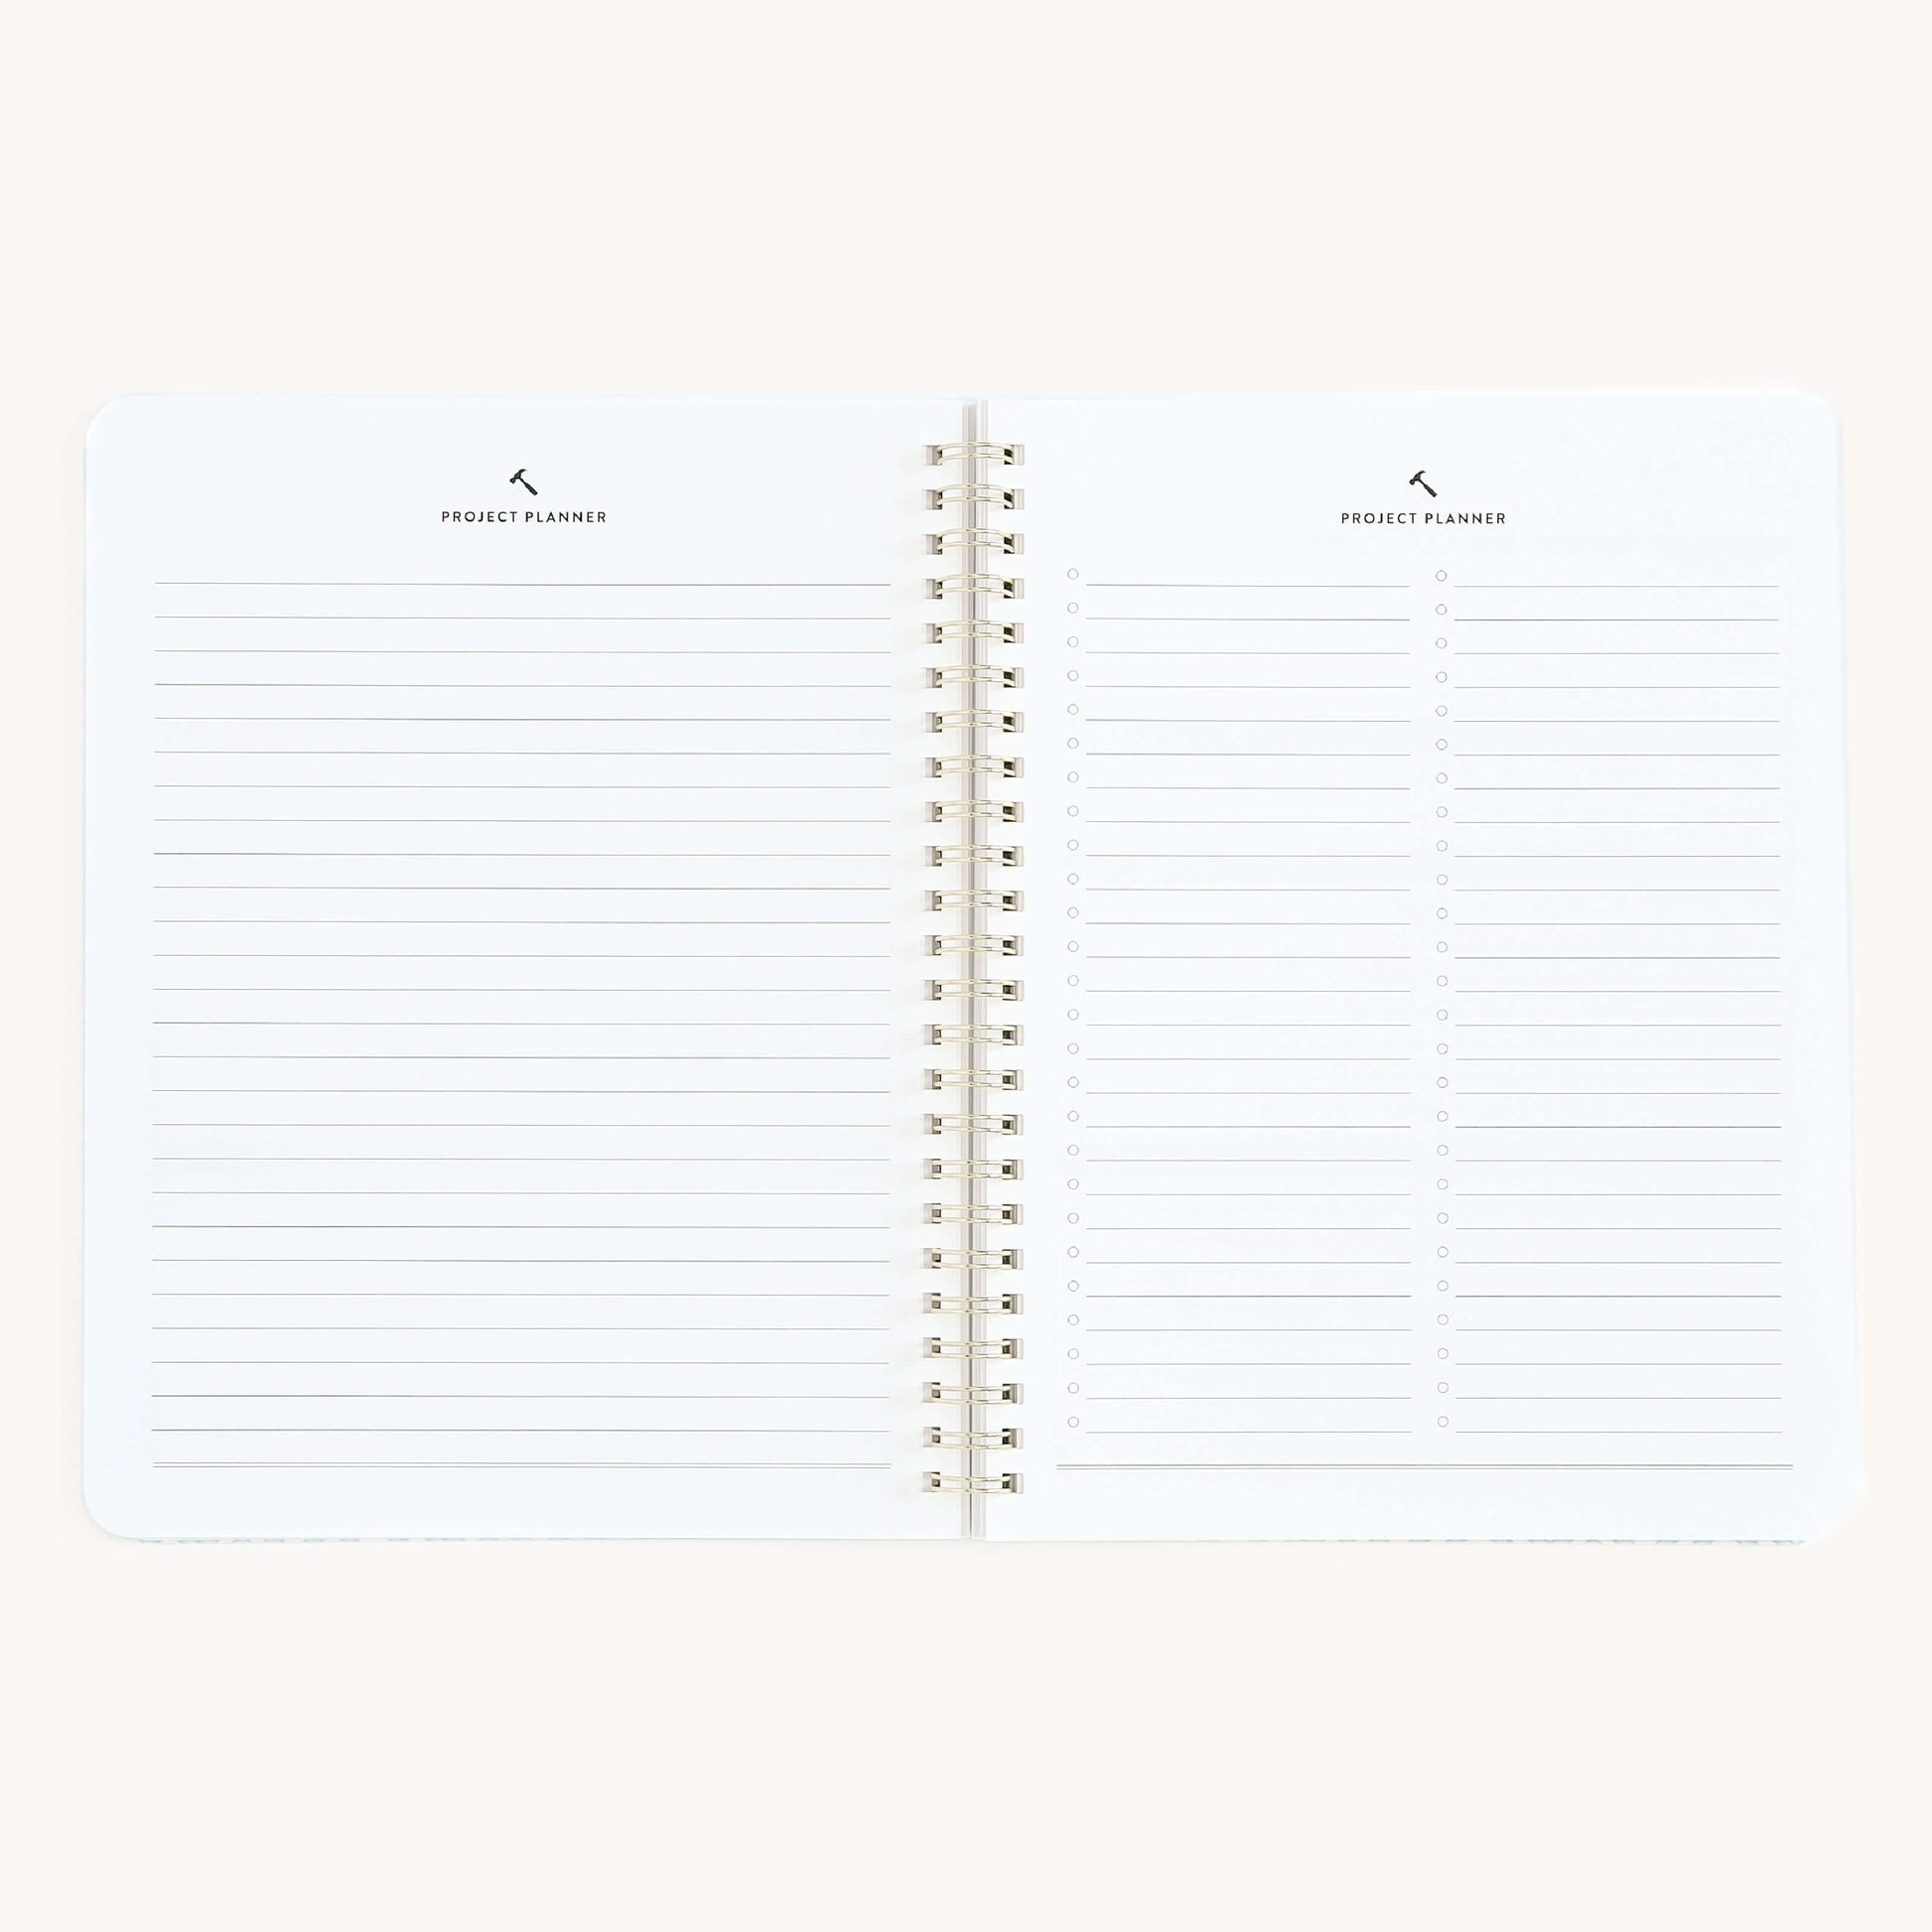 NOTES & CHECKLIST PAGES